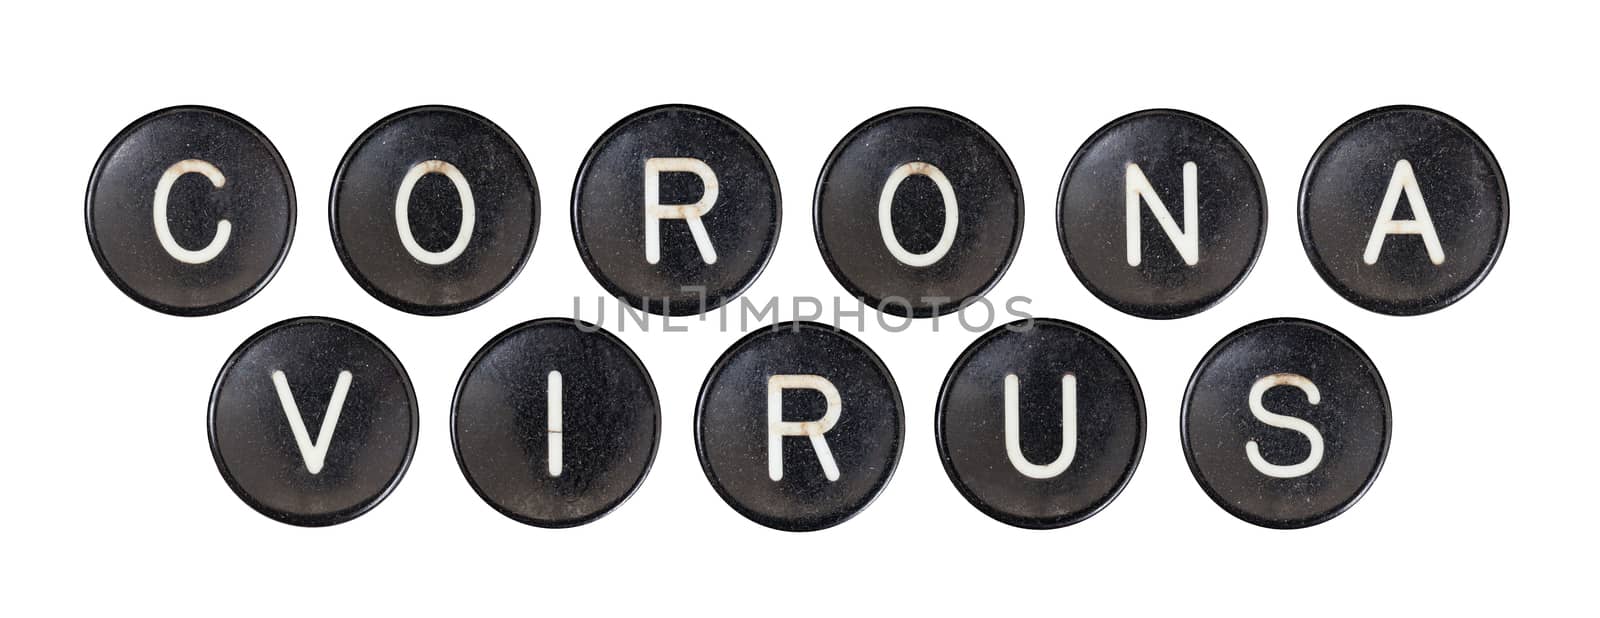 Old vintage typewriter buttons - Isolated on white by michaklootwijk